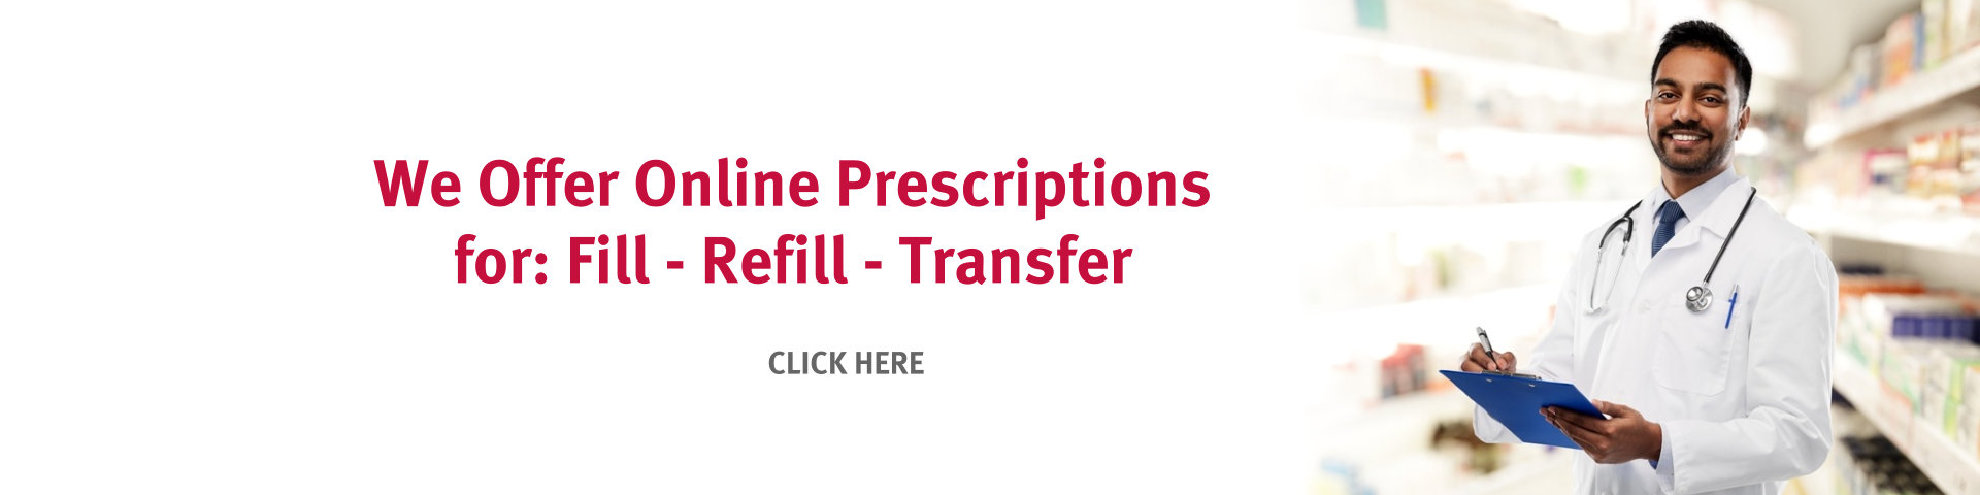 Online RX Refill at pharmasave London Road Pharmacy